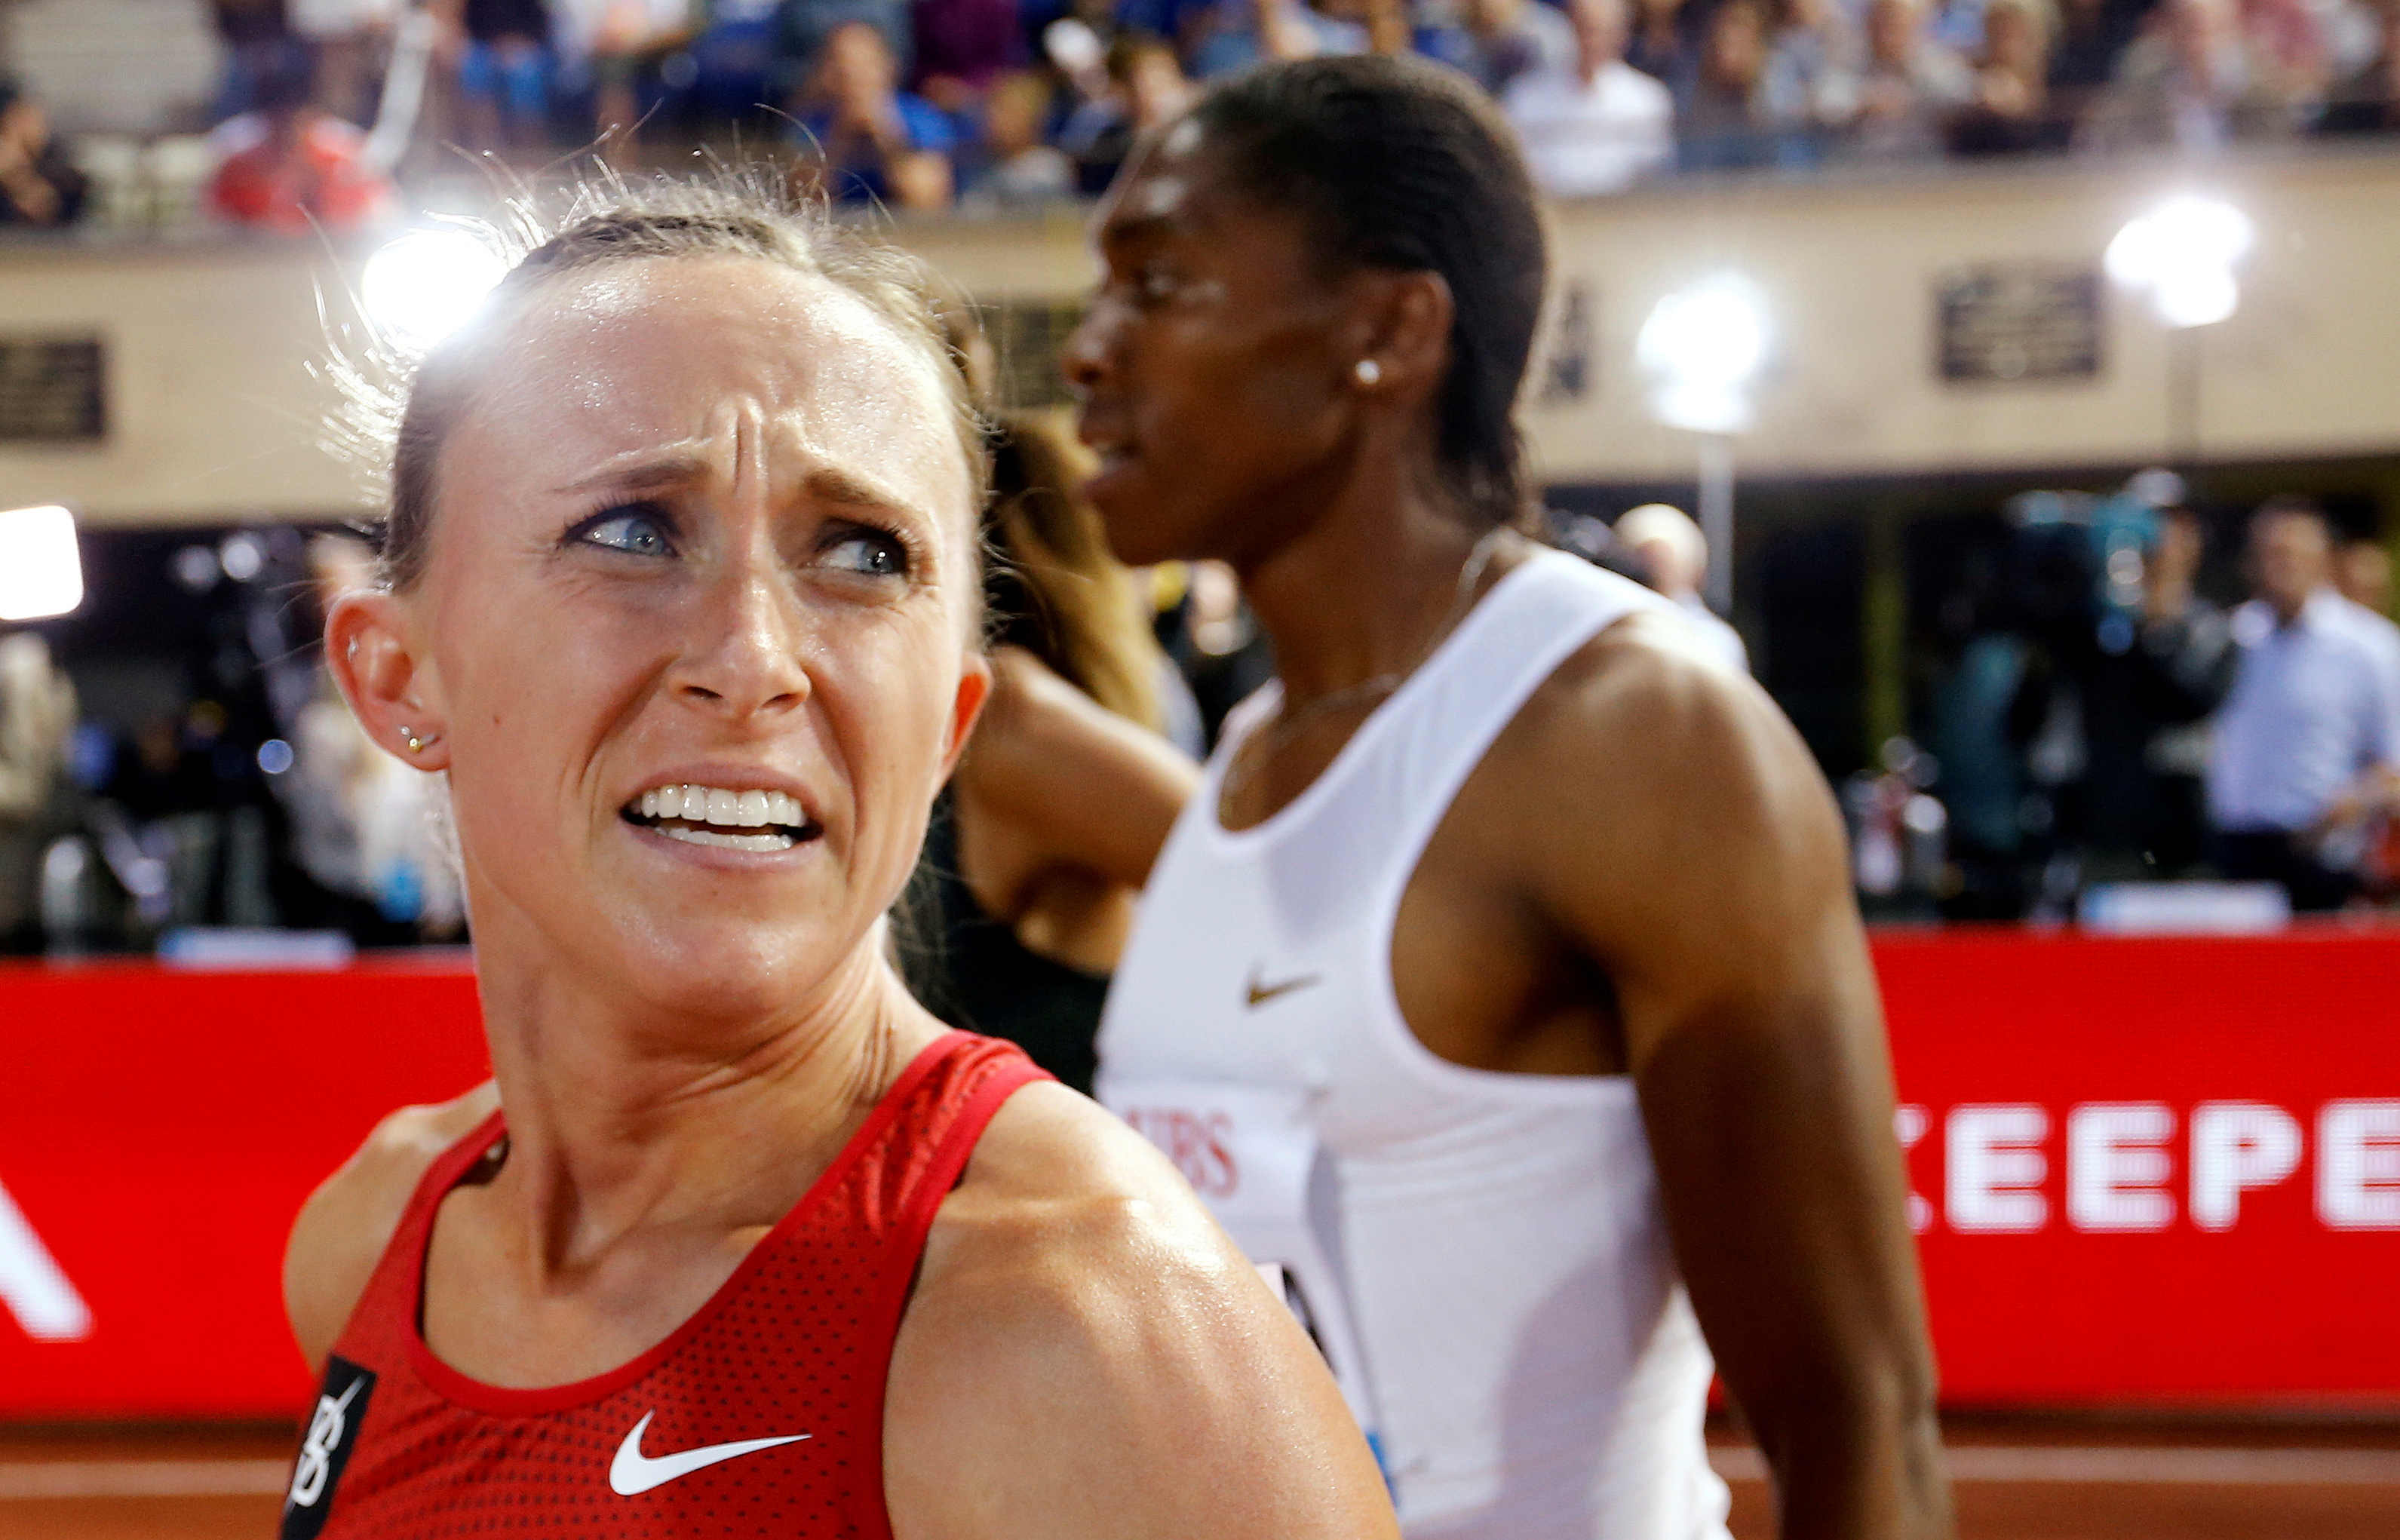 Appeals fail for U.S. runner Shelby Houlihan, who is banned until 2025